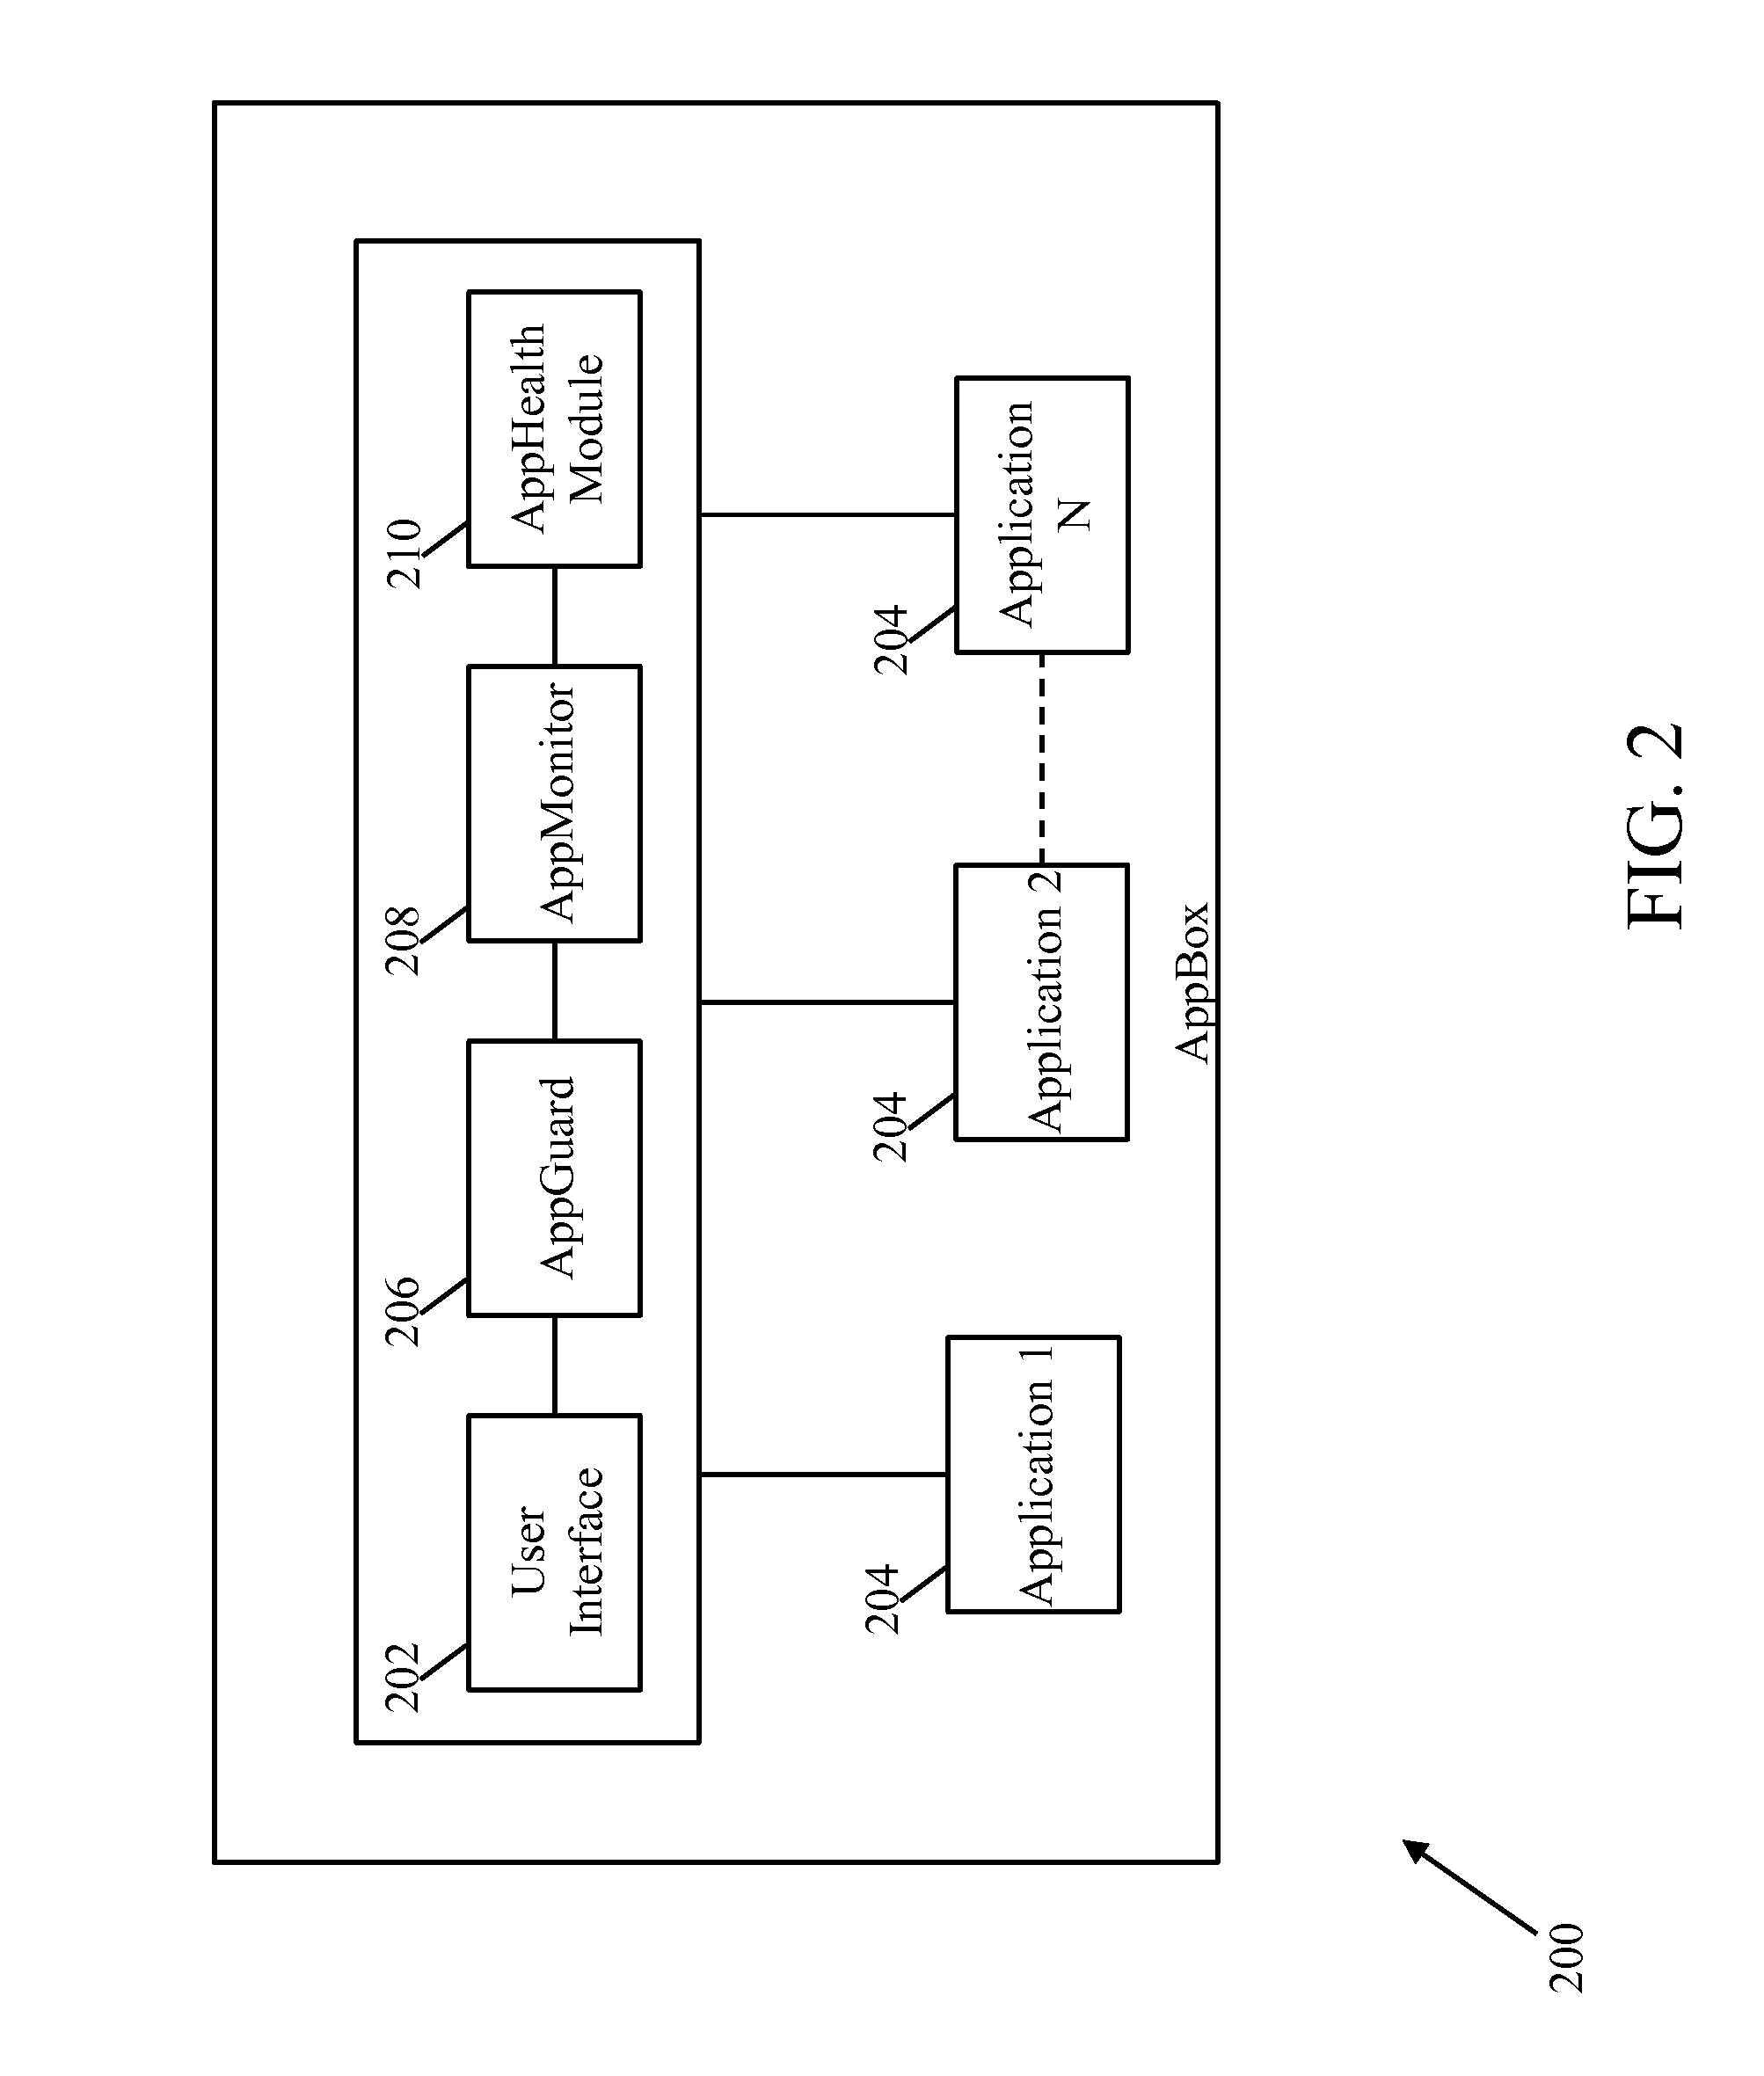 System and method for securely managing enterprise related applications and data on portable communication devices